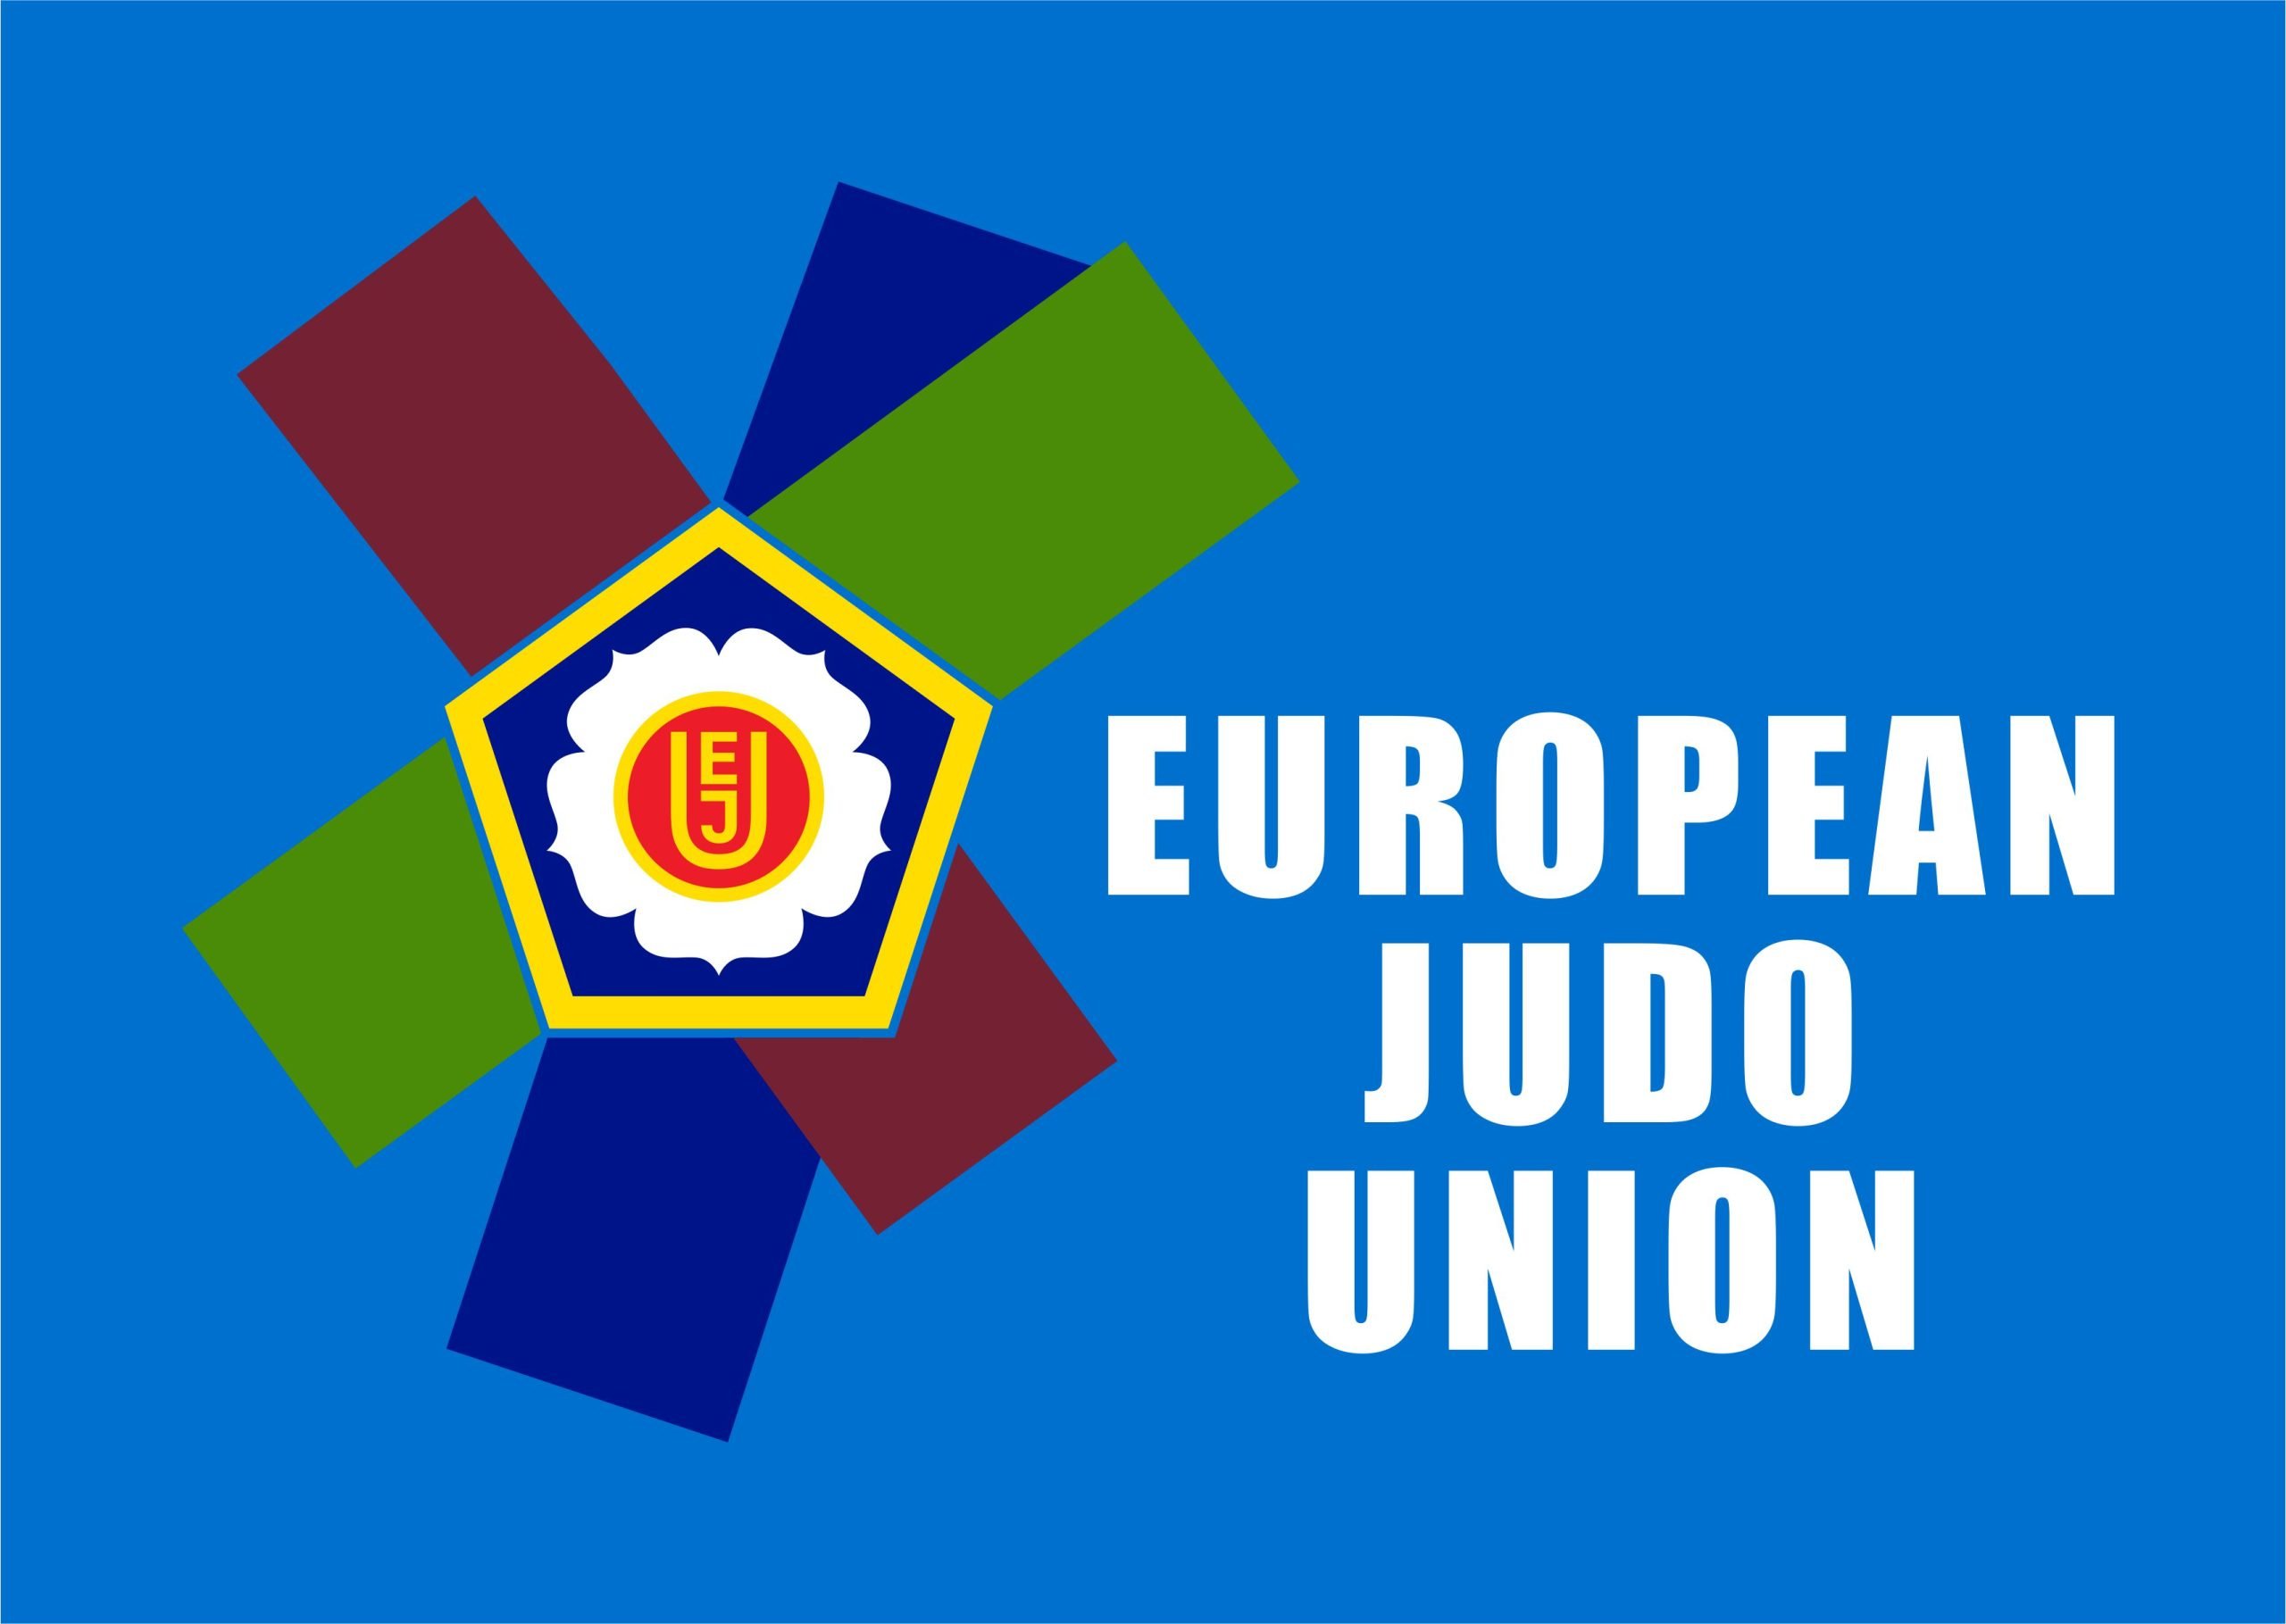 OFFICIAL ANNOUNCEMENT OF THE EUROPEAN JUDO UNION